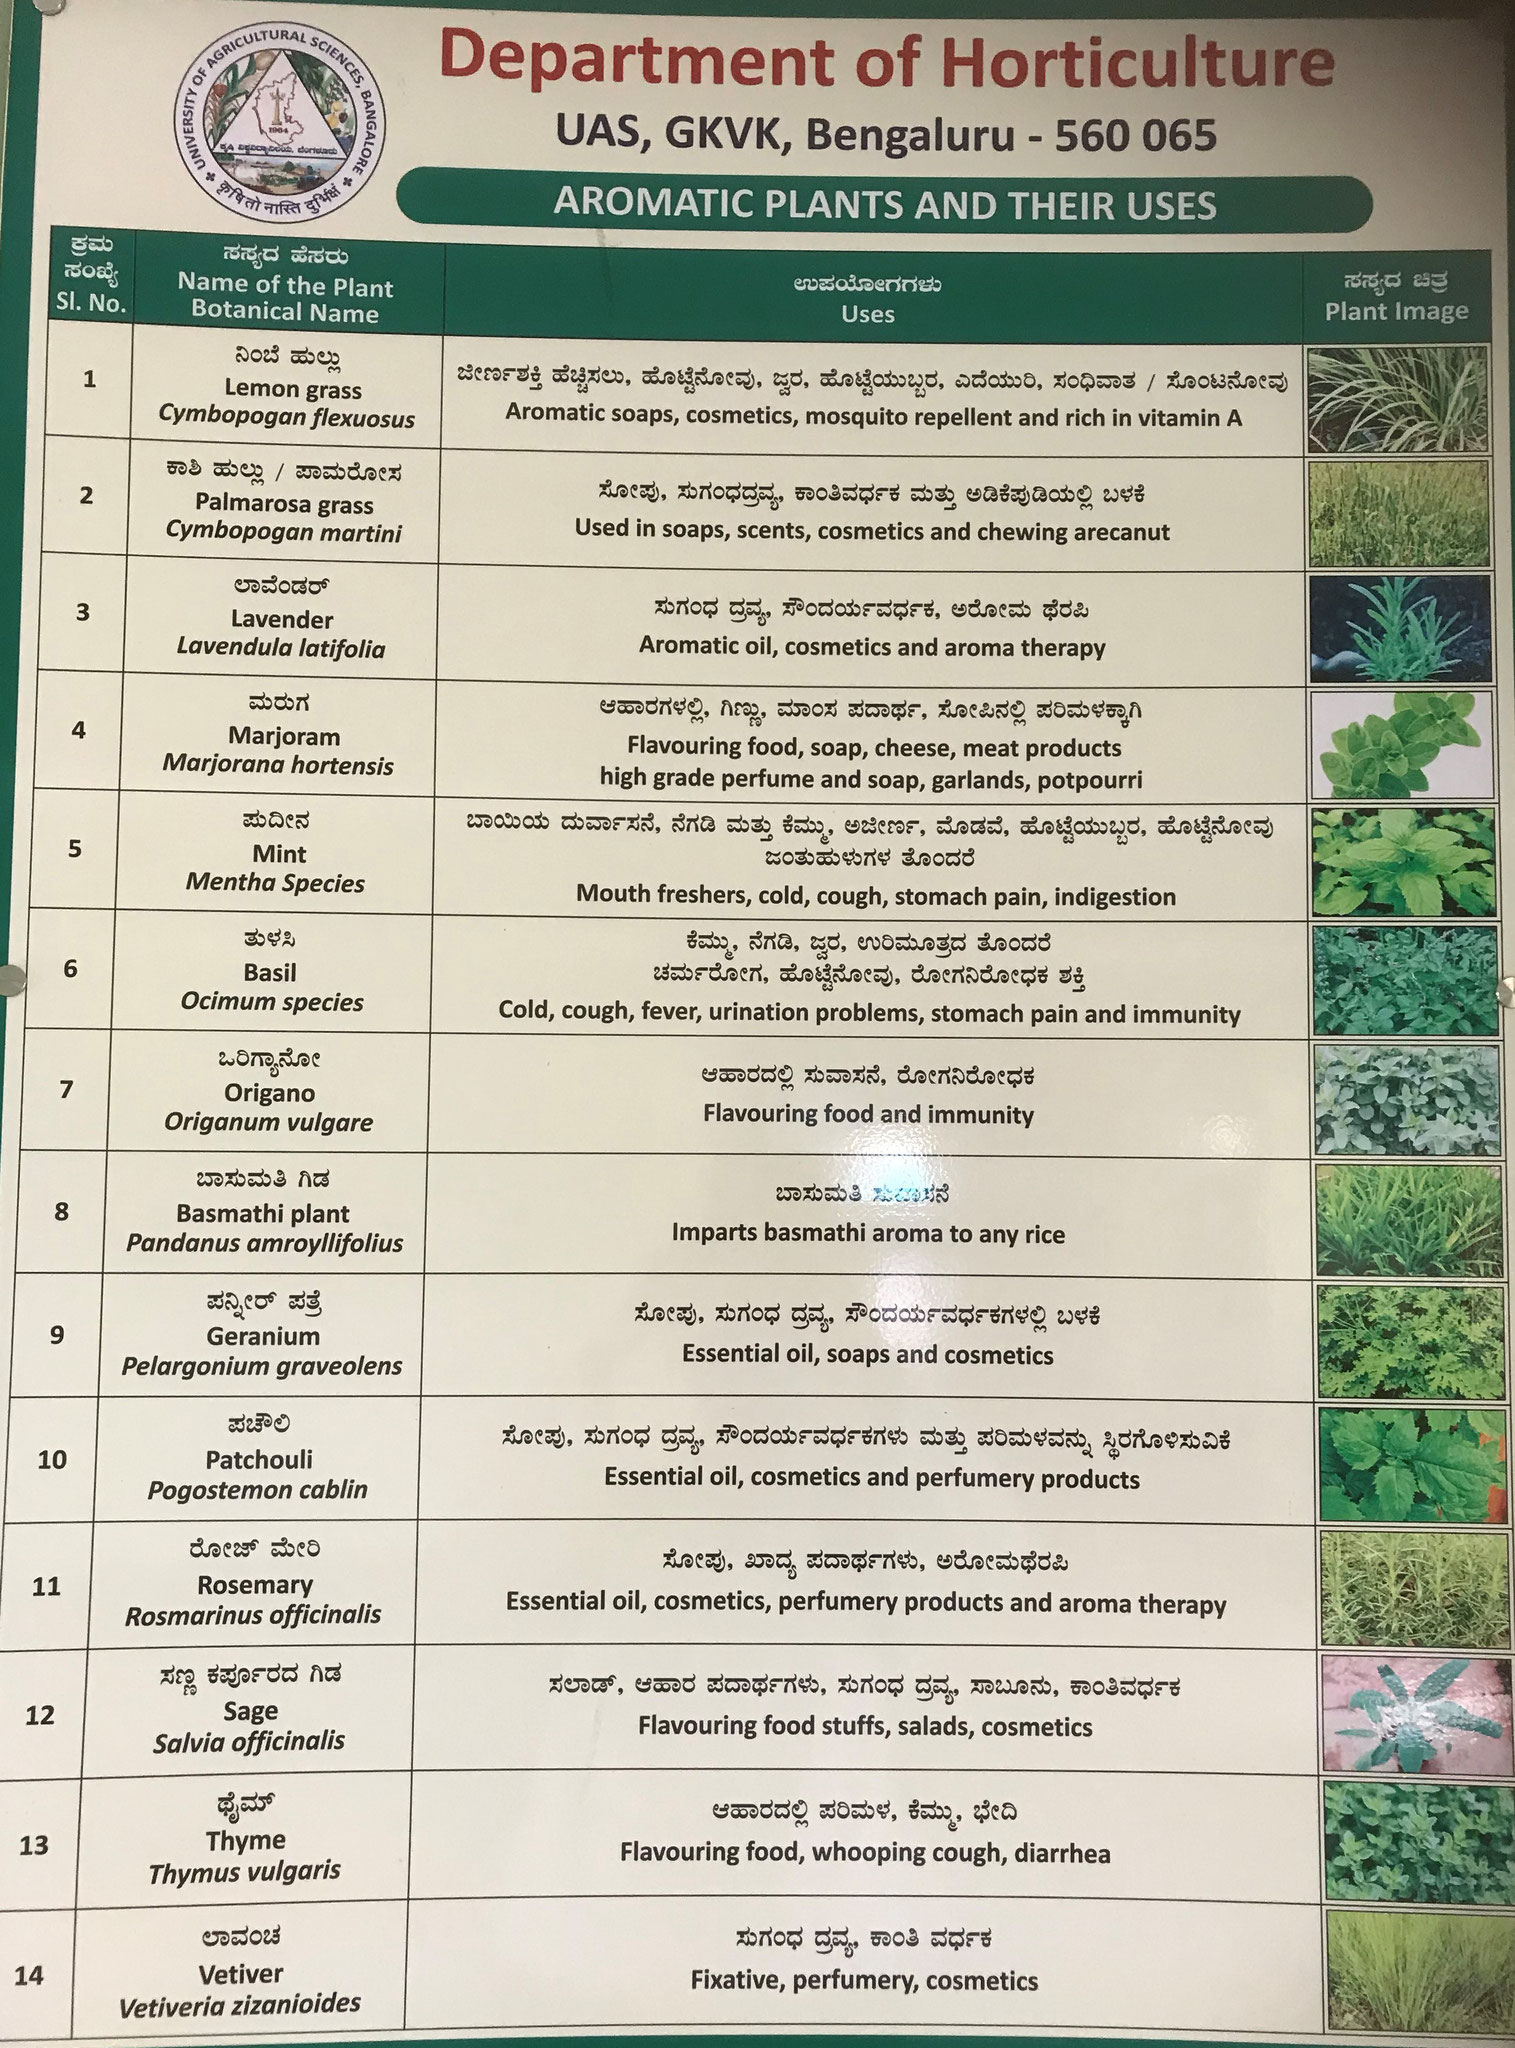 Aromatic plants and their uses